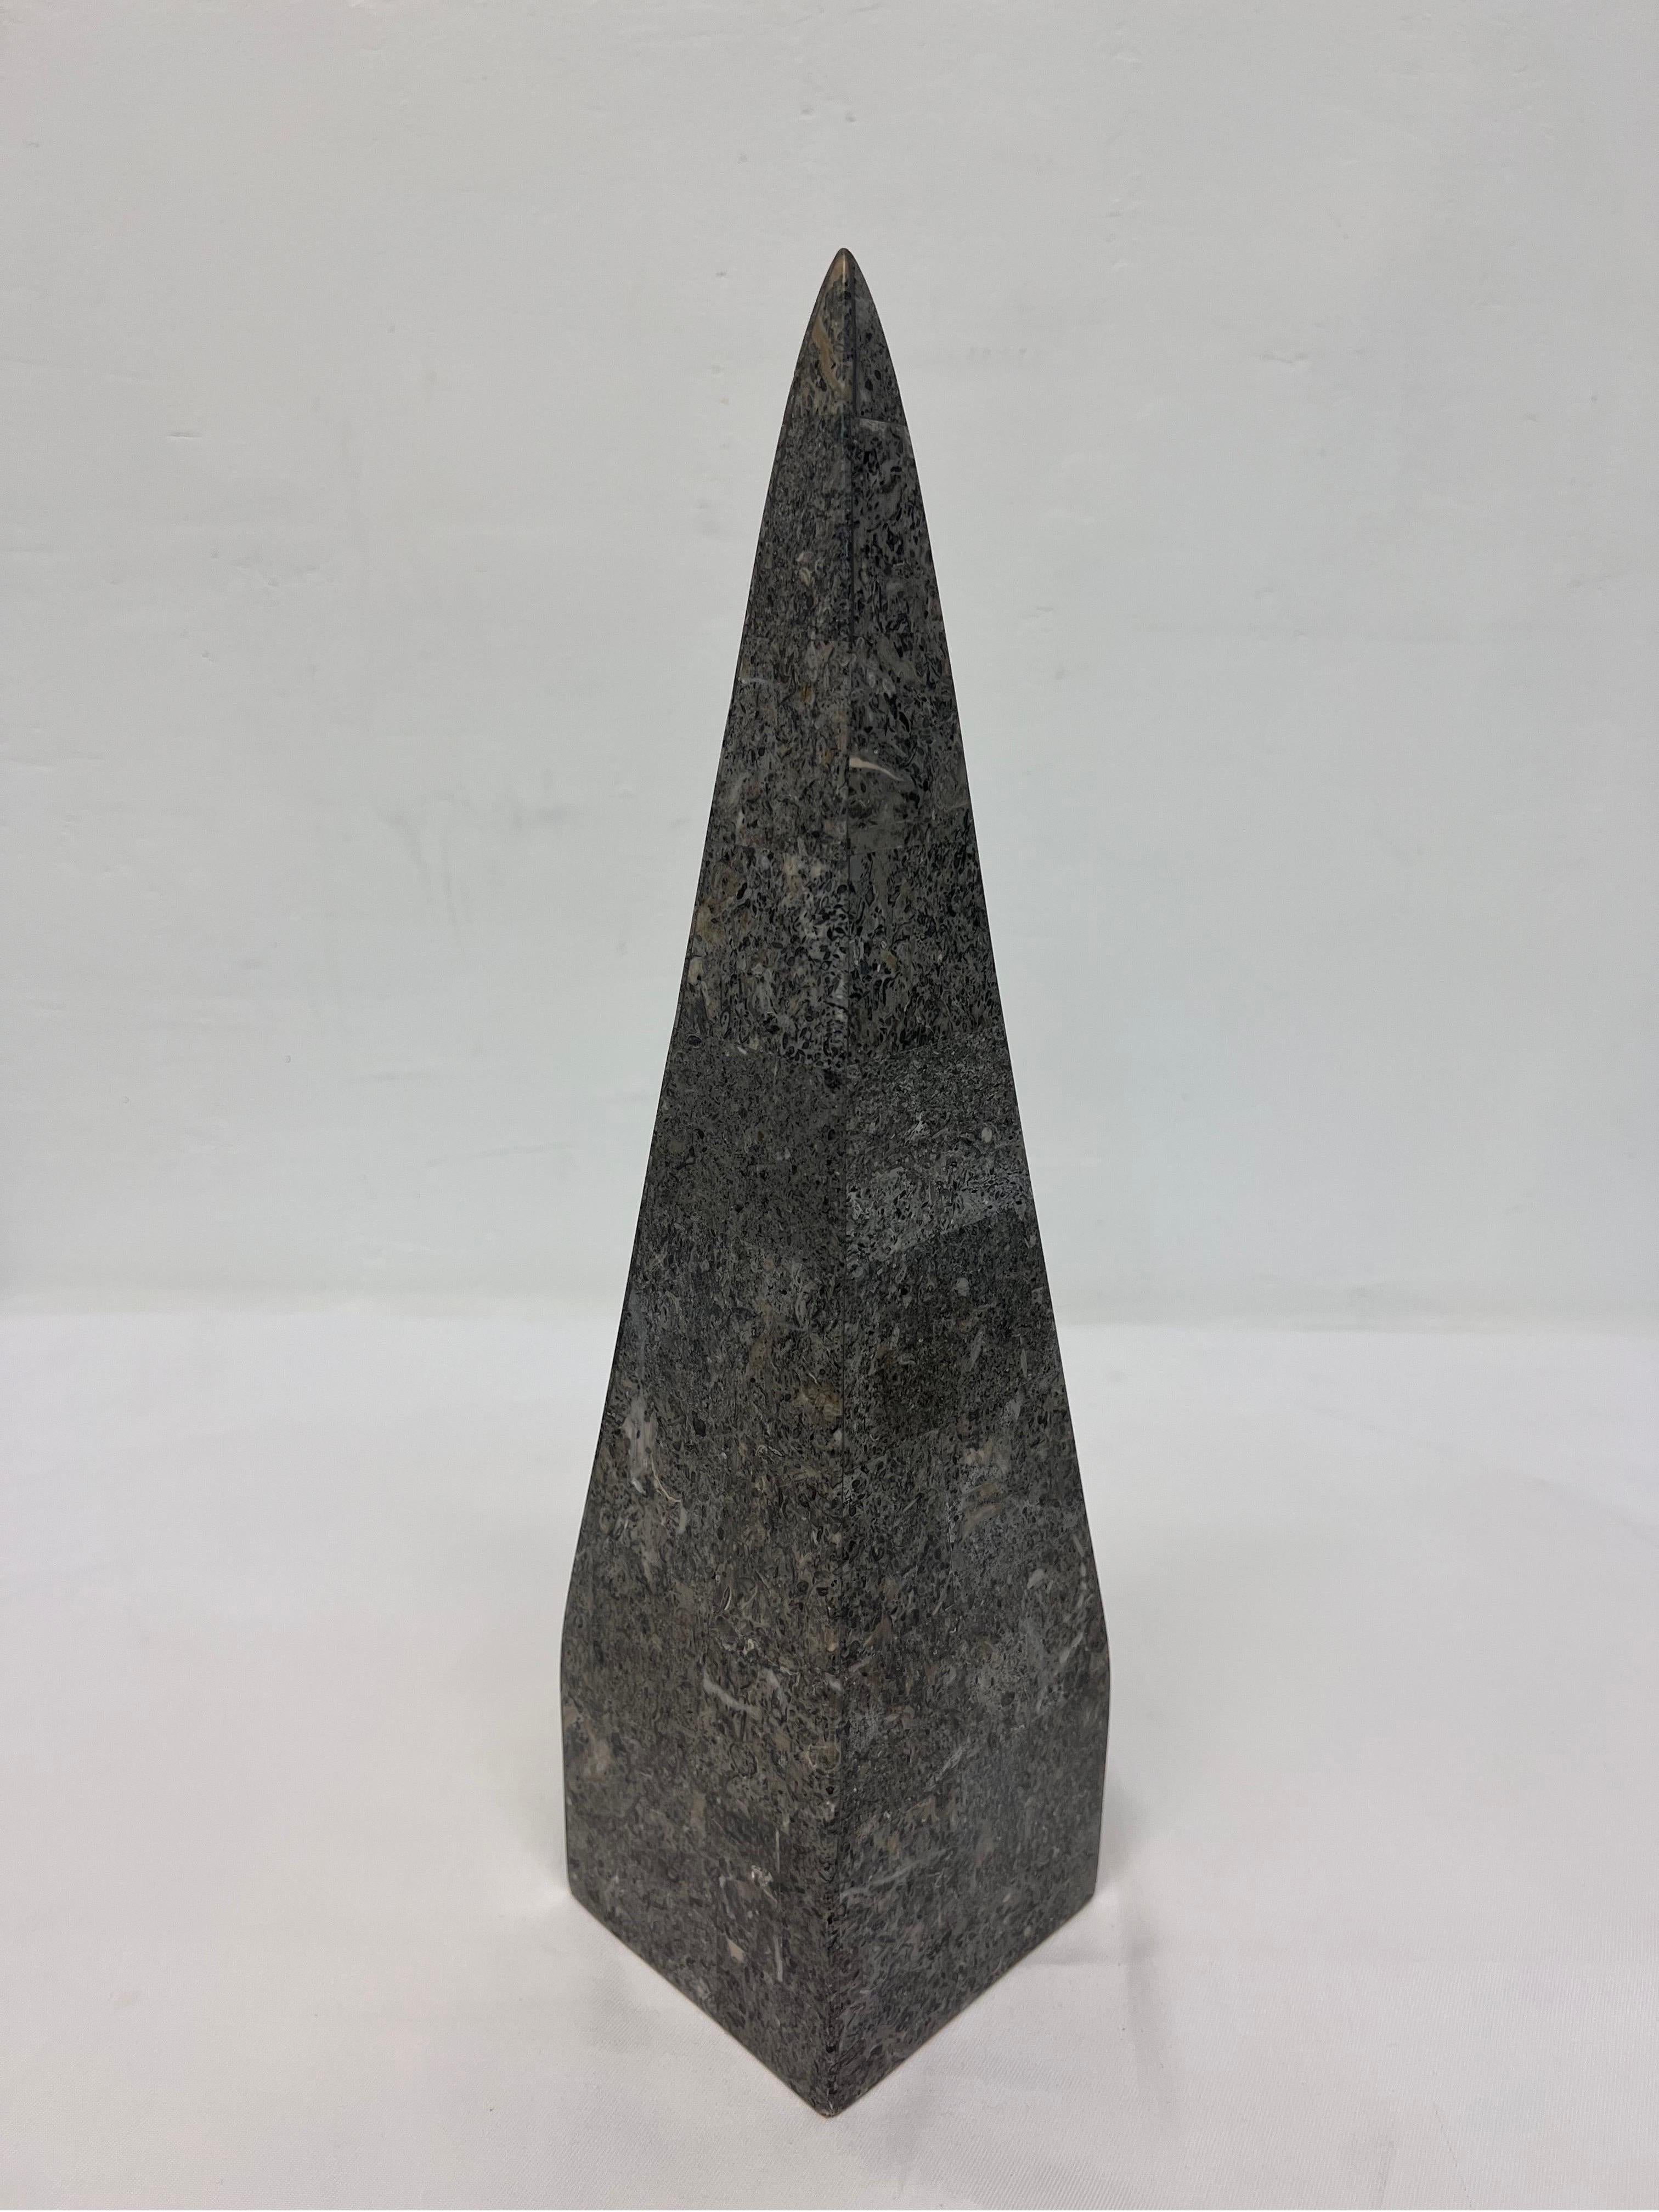 Tessellated Stone Obelisk For Sale 1